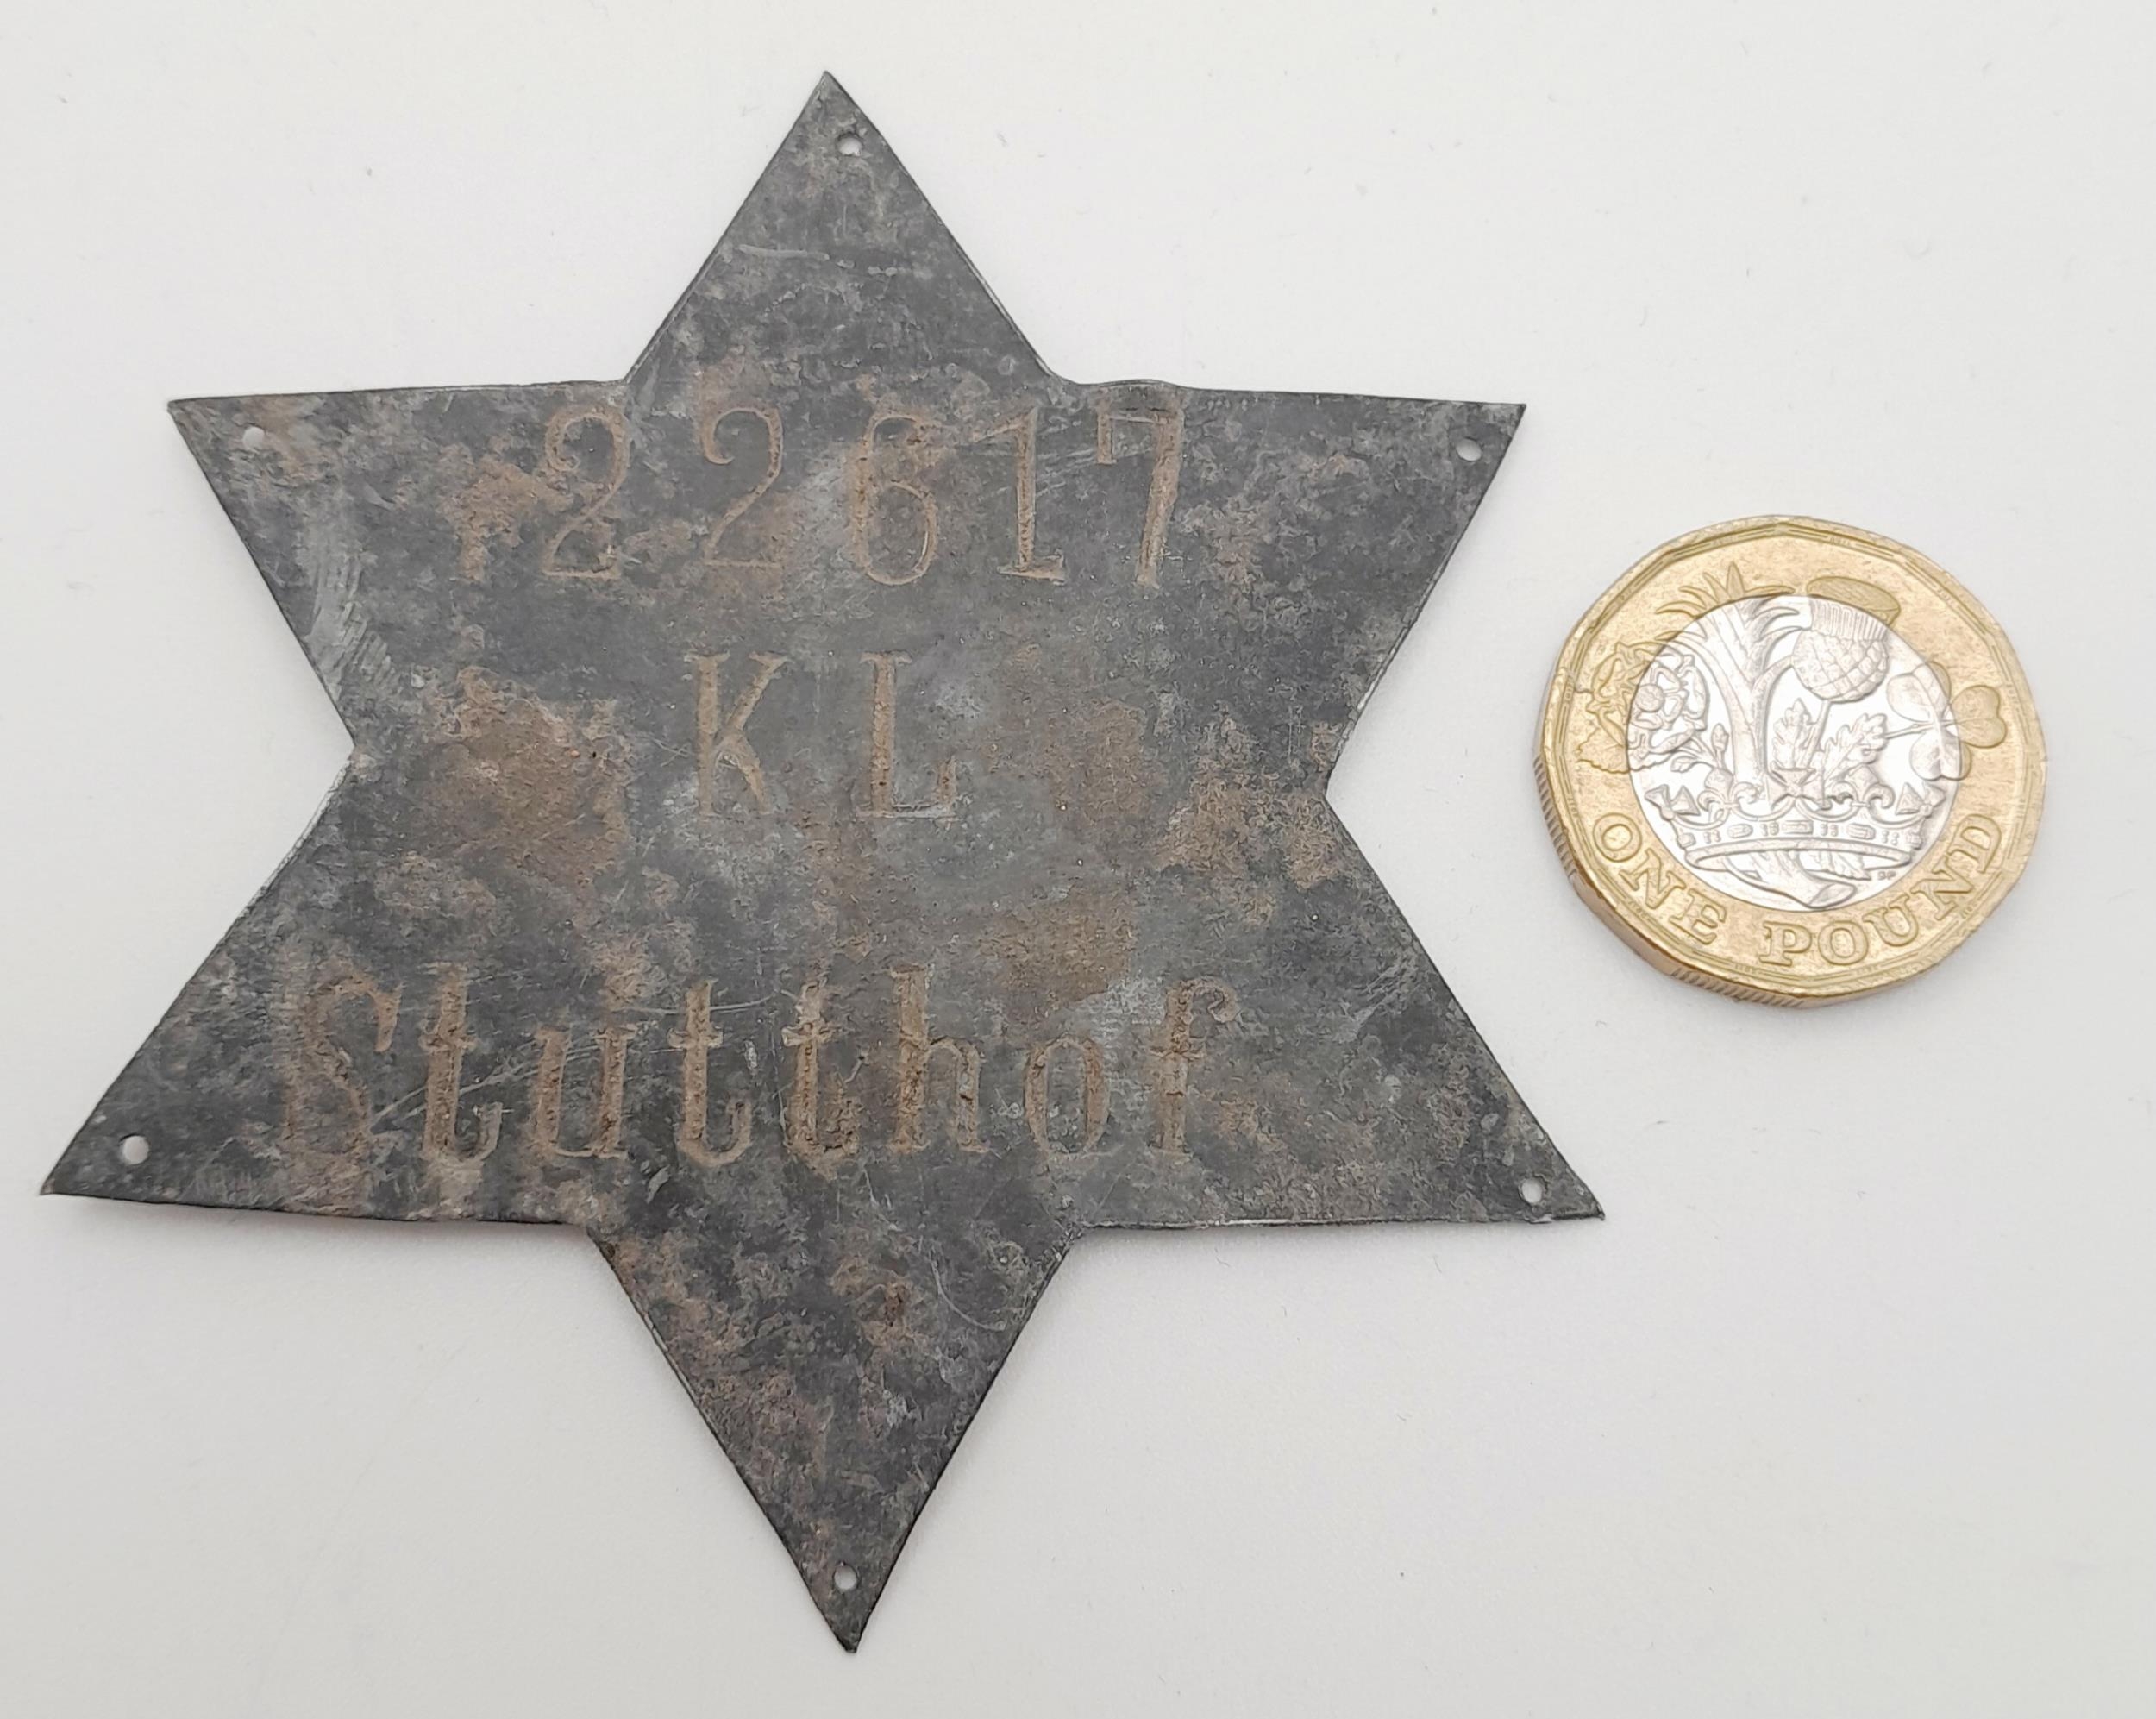 WW2 Polish Jewish Ghetto Police Badge for Stutthof. A metal star that would have been sewn onto an - Image 3 of 3